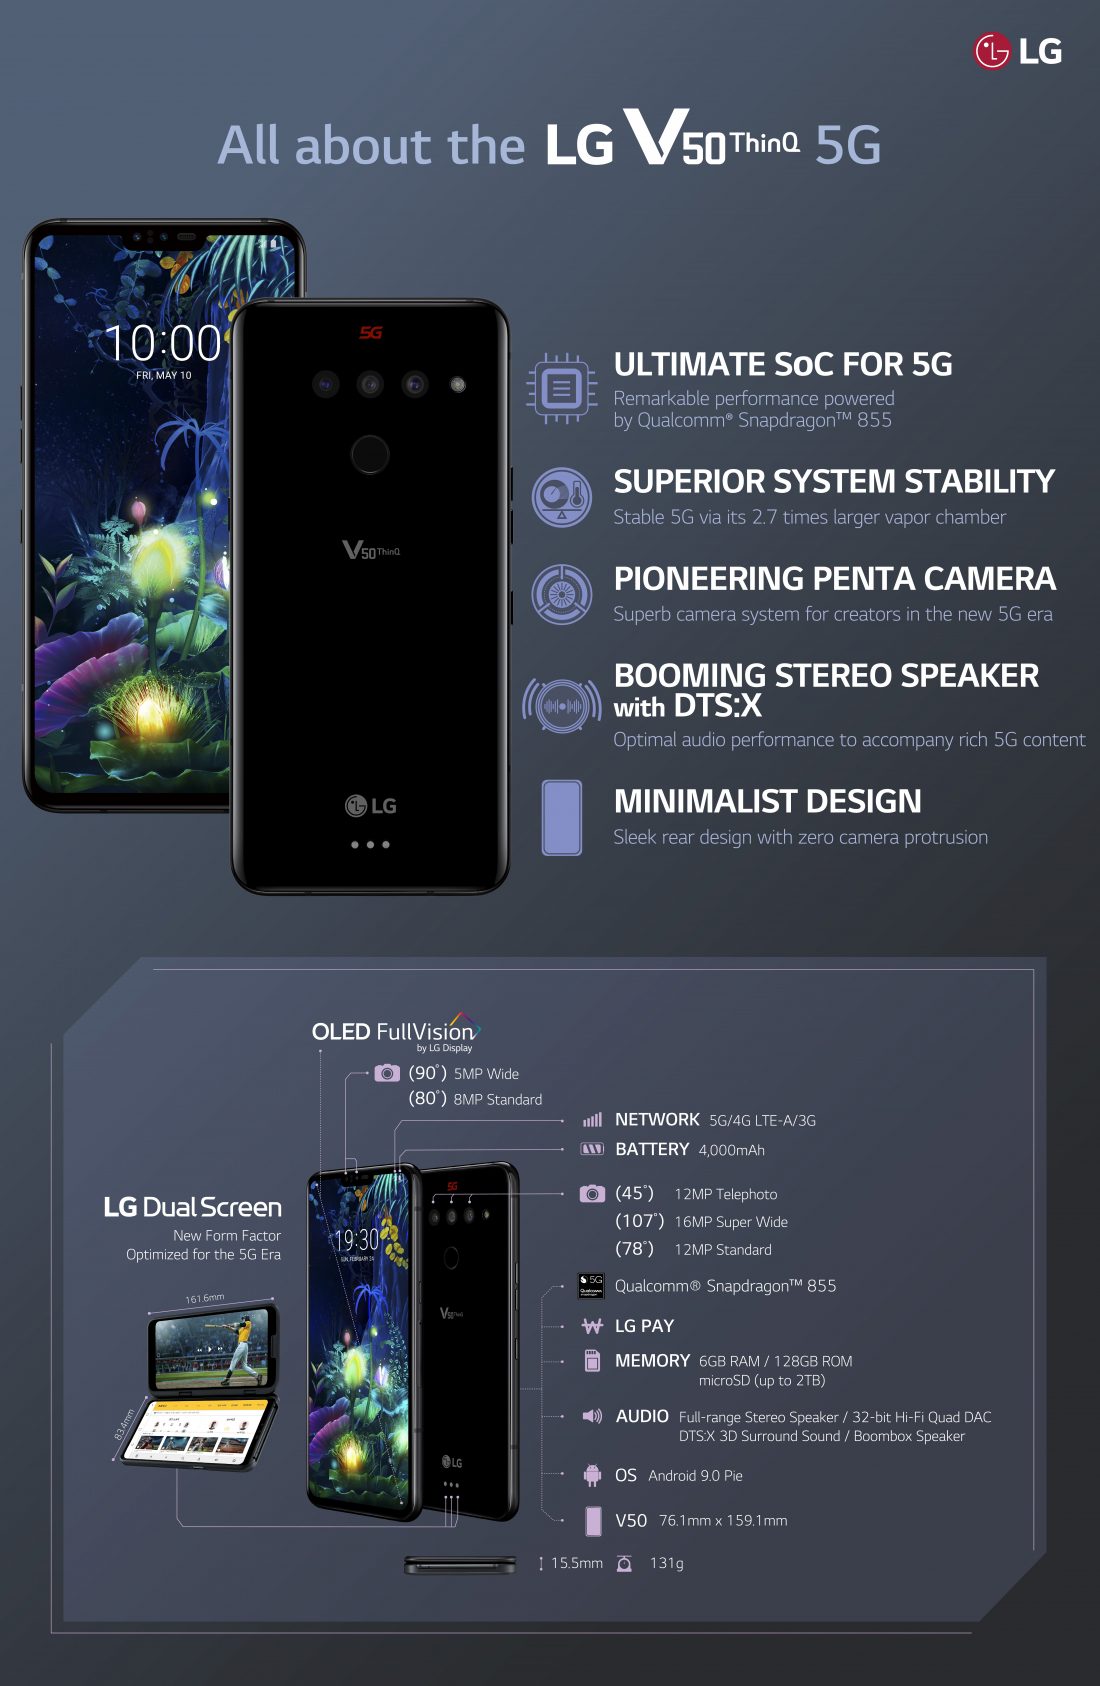 This infographic titled, “All about the LG V50 ThinQ 5G,” introduces the key benefits and specs of the smartphone including its 5G compatibility, stable system operation, Penta camera, DTS:X-enabled speaker and minimalist design.